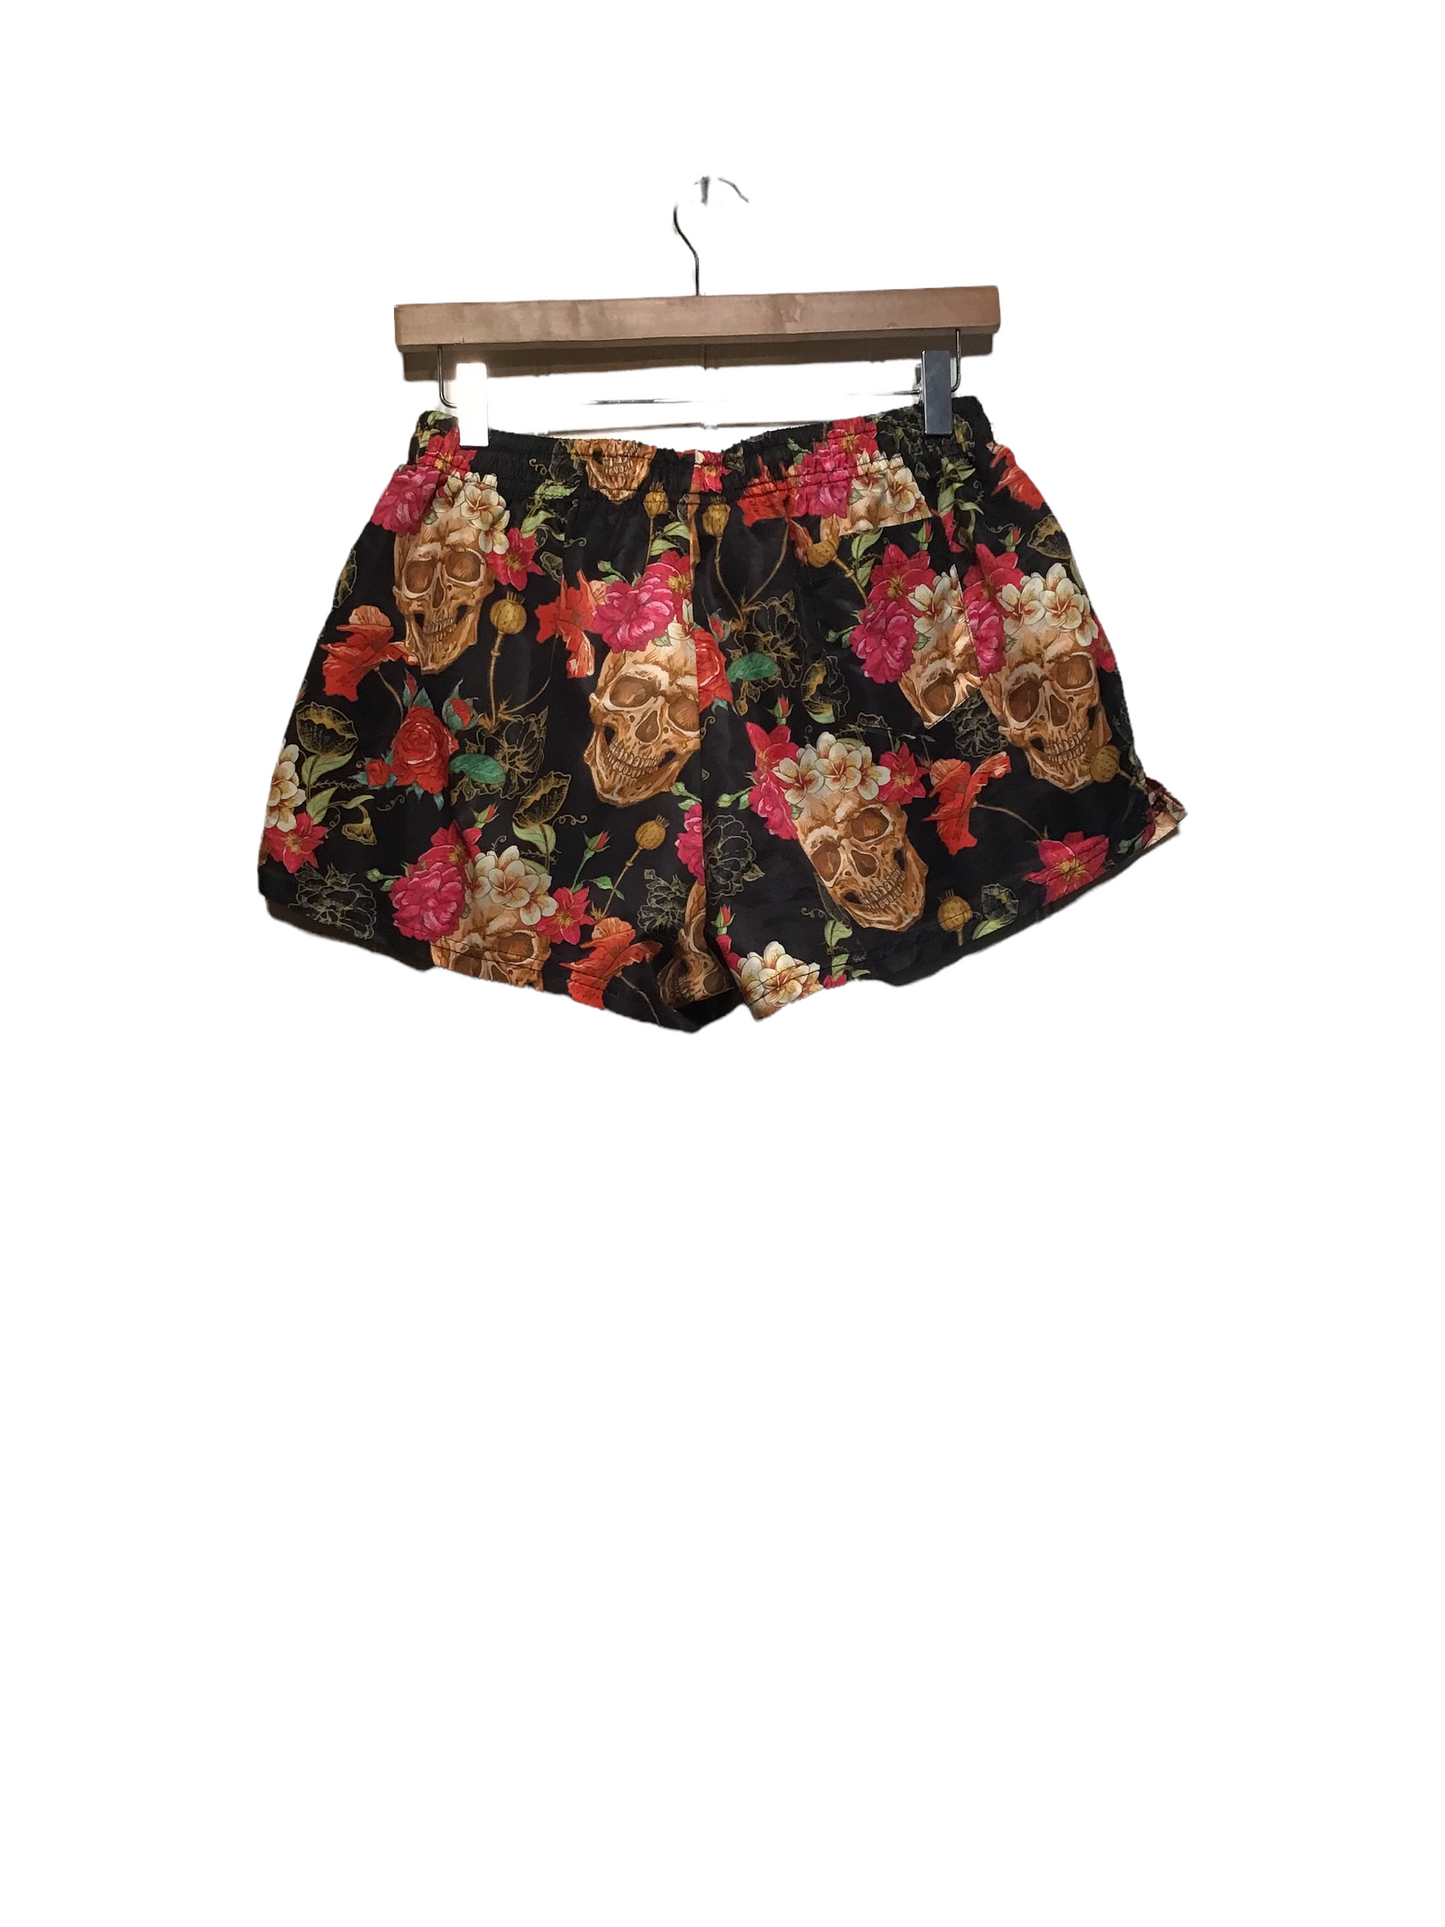 Flower and Skull Sport Shorts (Size XS)